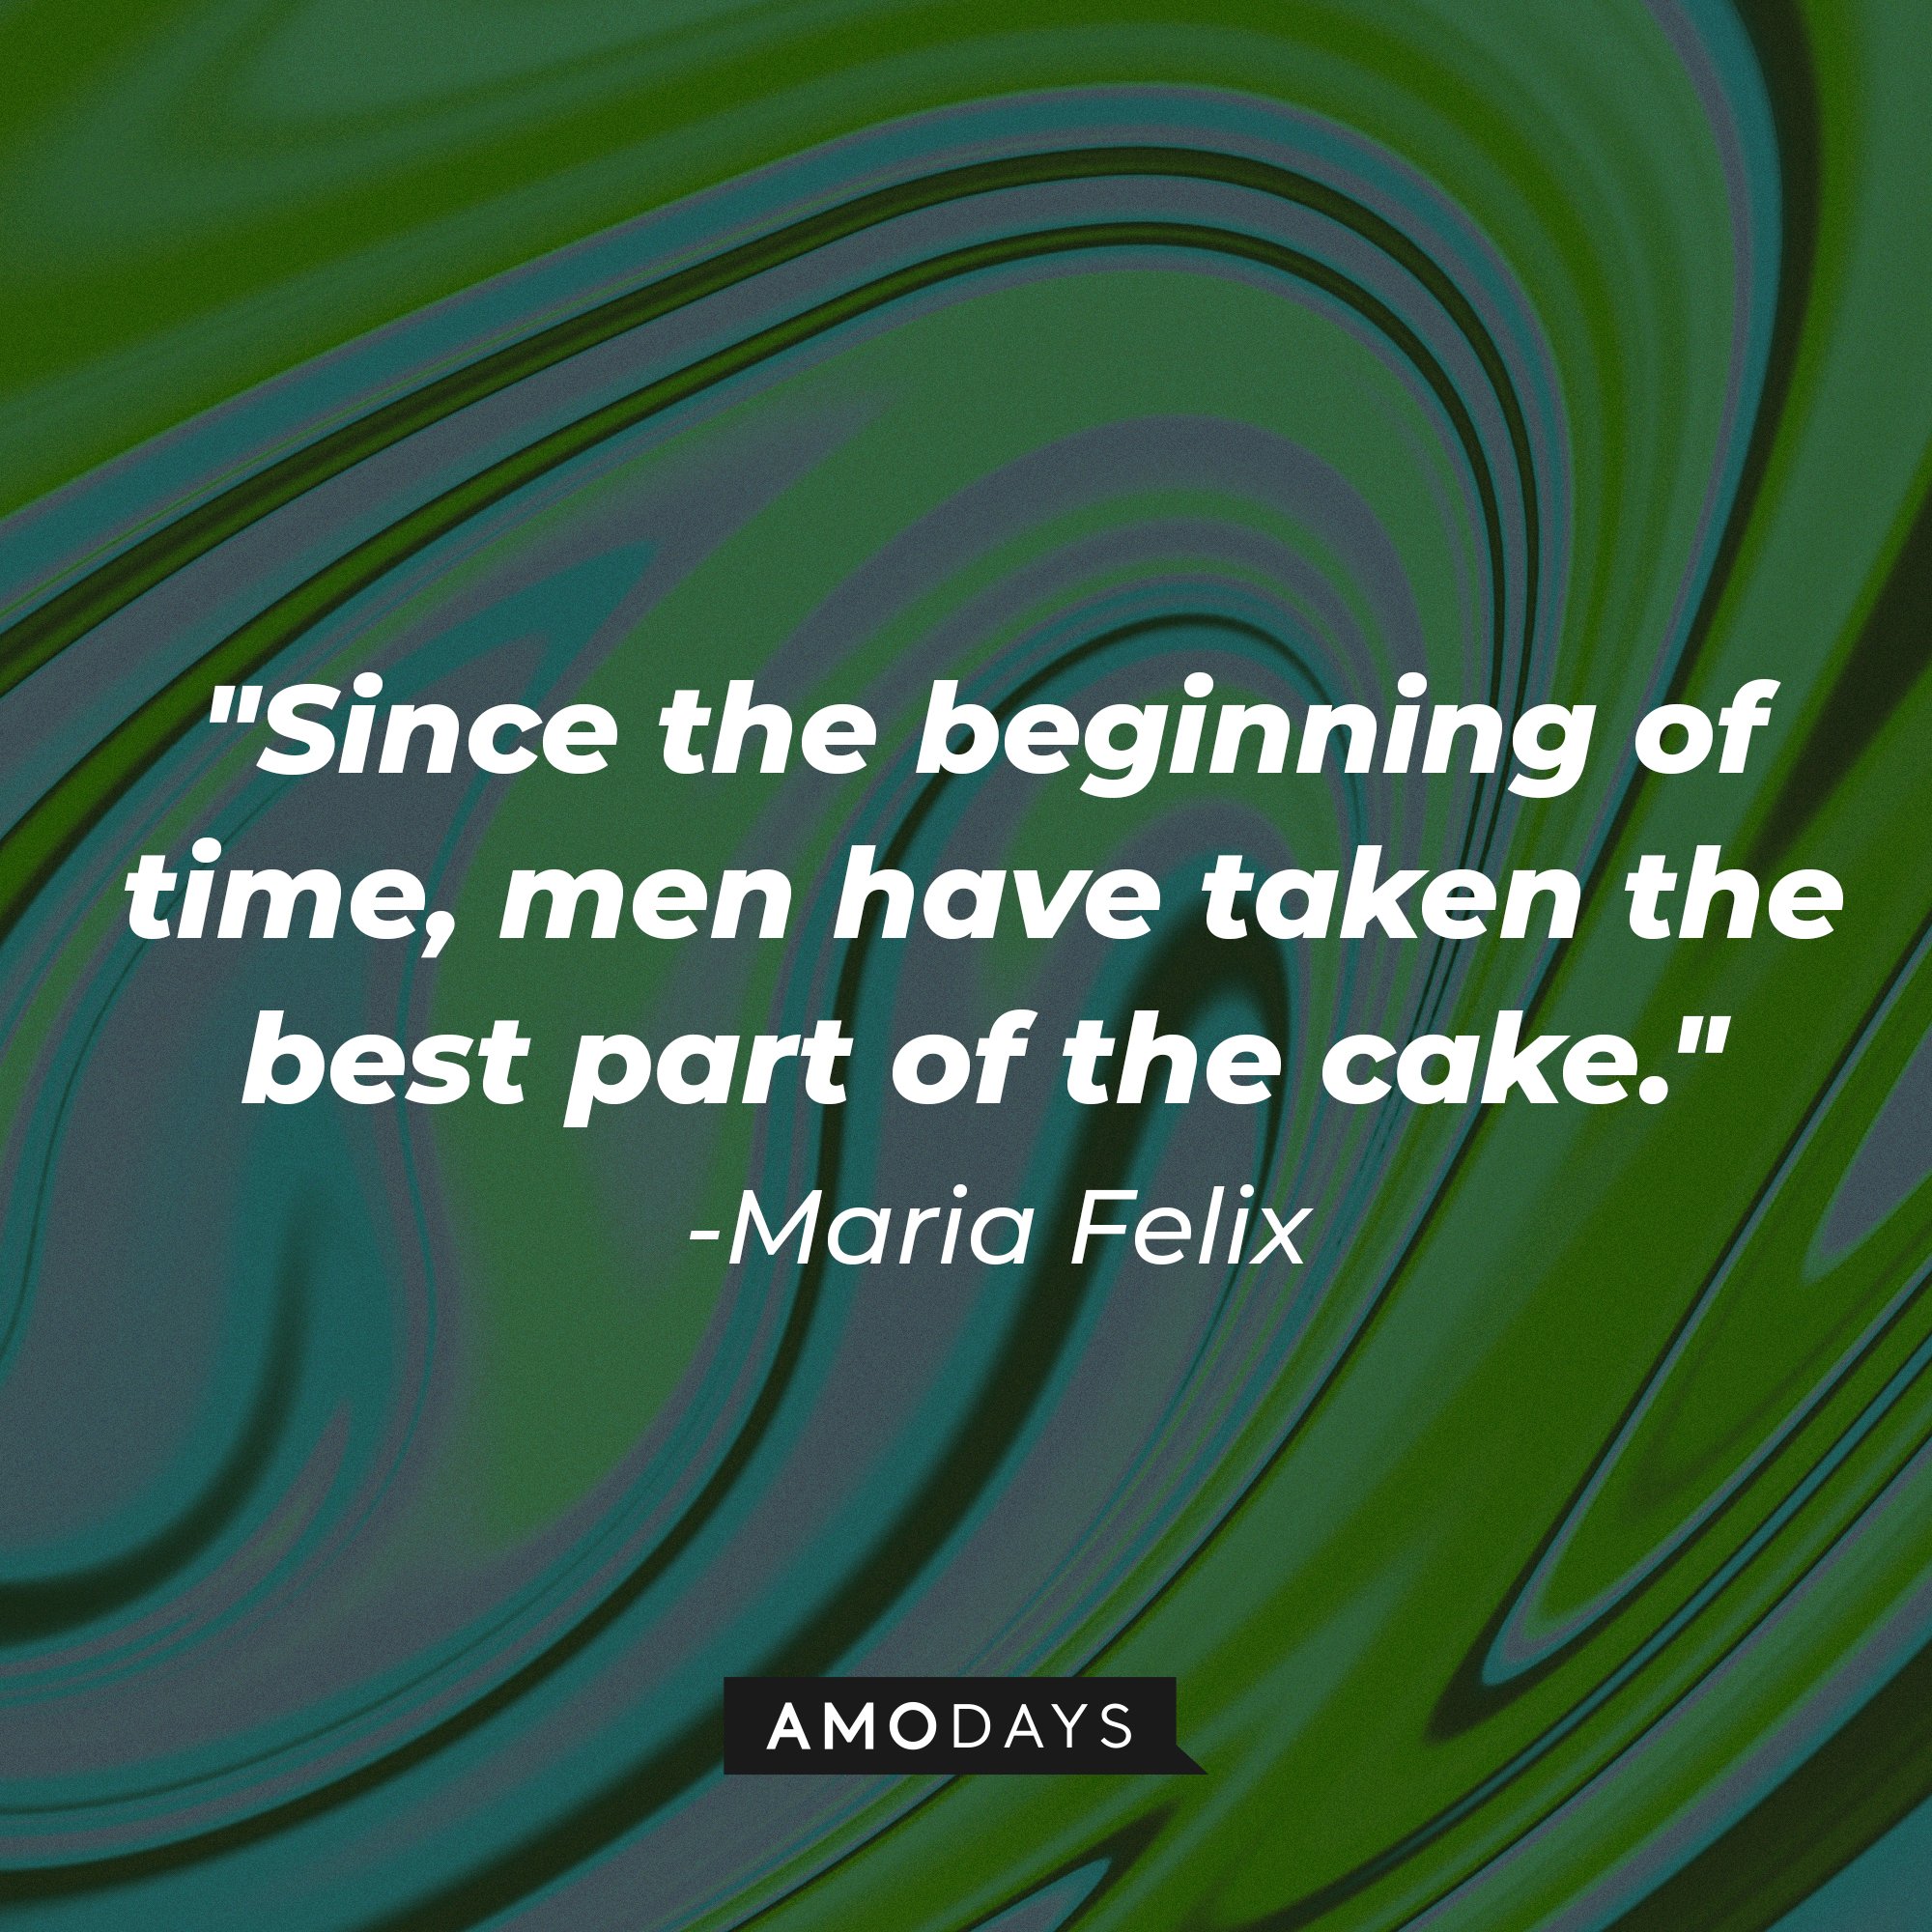 Maria Felix's quote: "Since the beginning of time, men have taken the best part of the cake." | Image: AmoDays